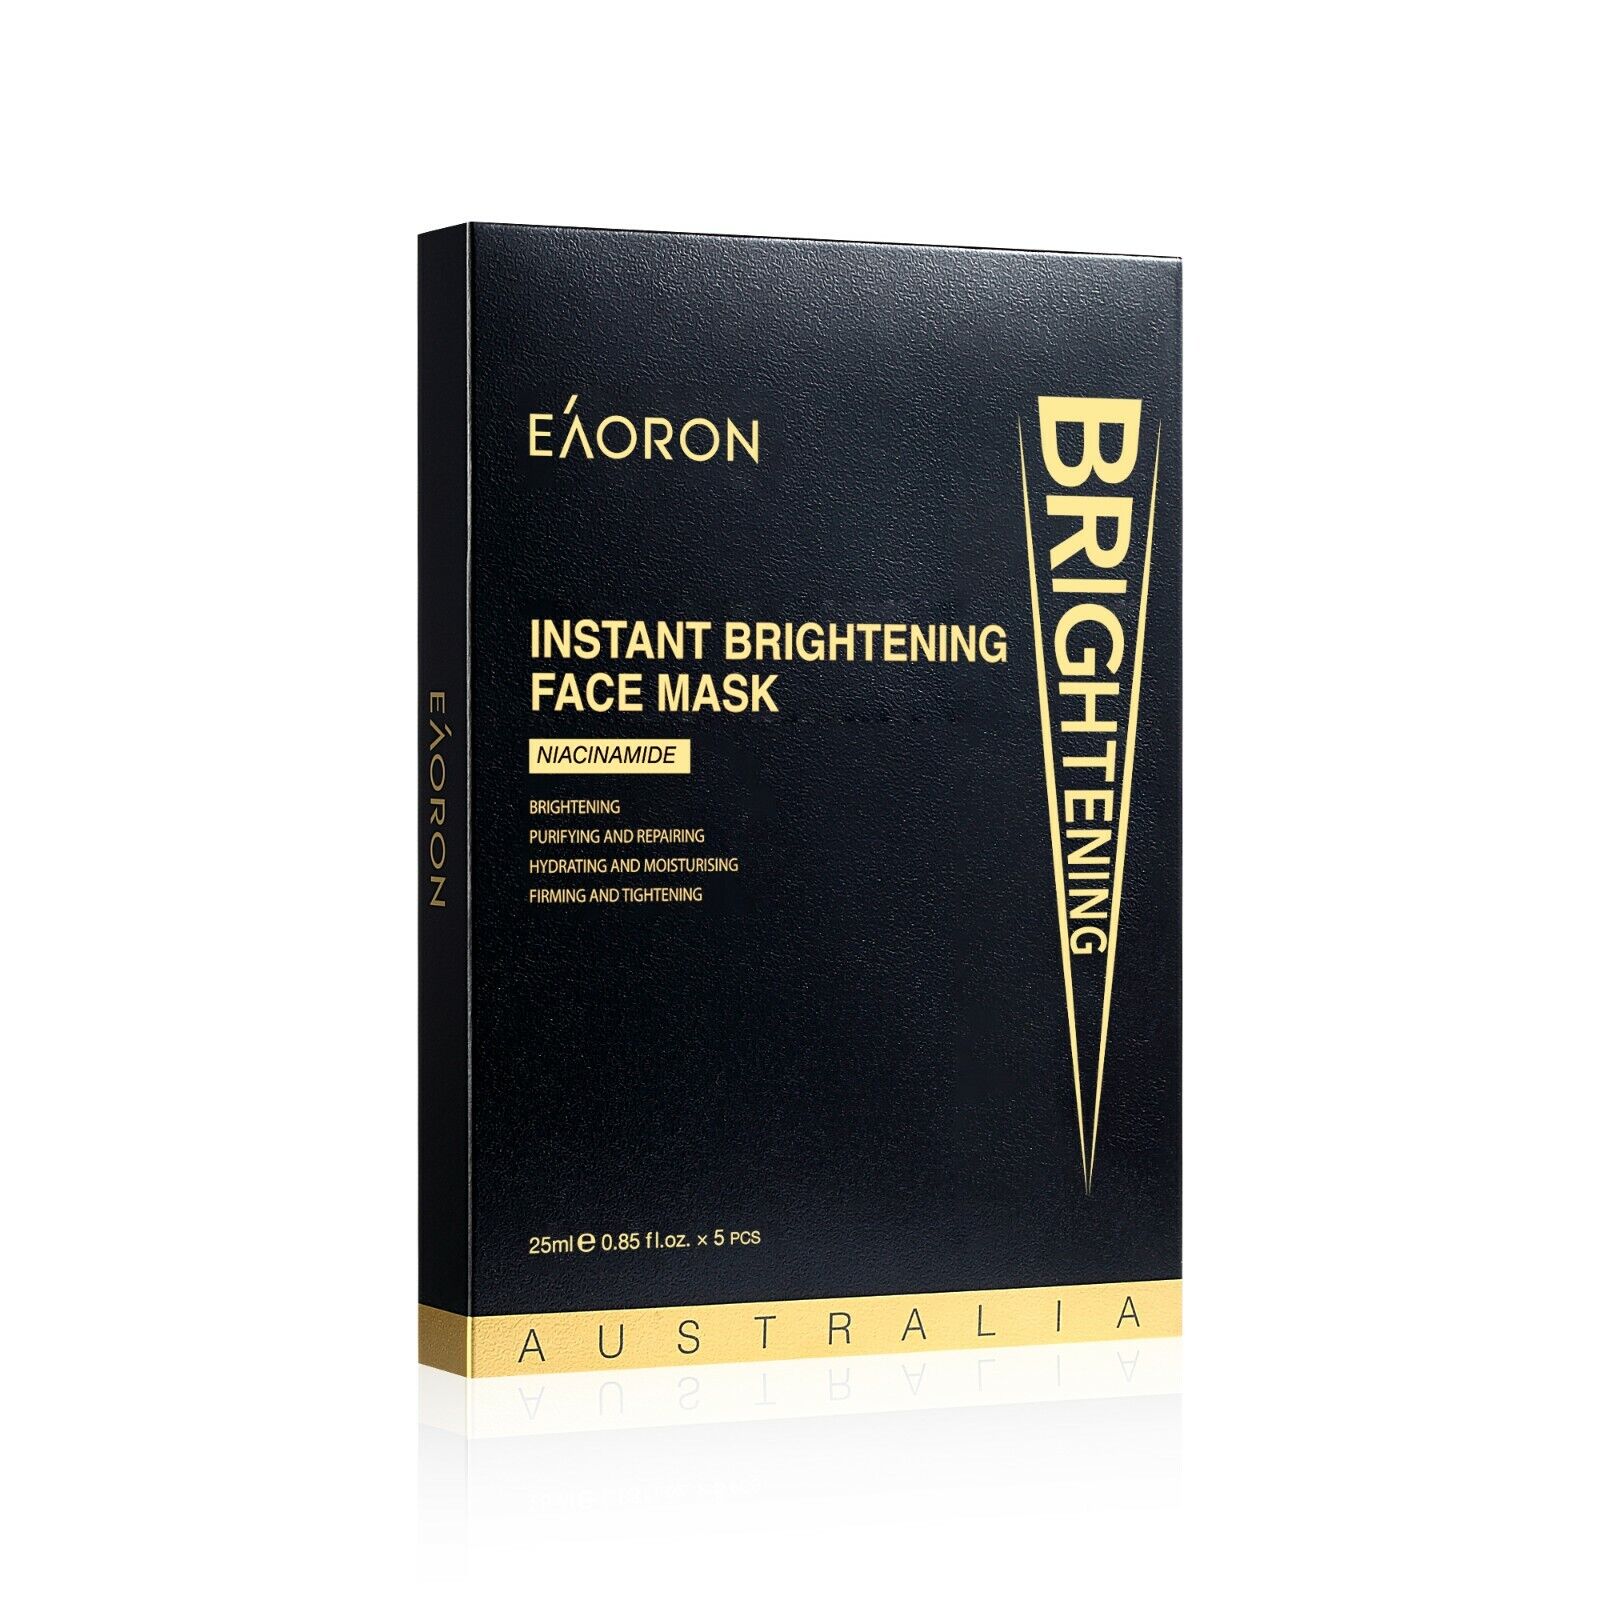 Eaoron Instant Brightening Face Mask 5 Packs